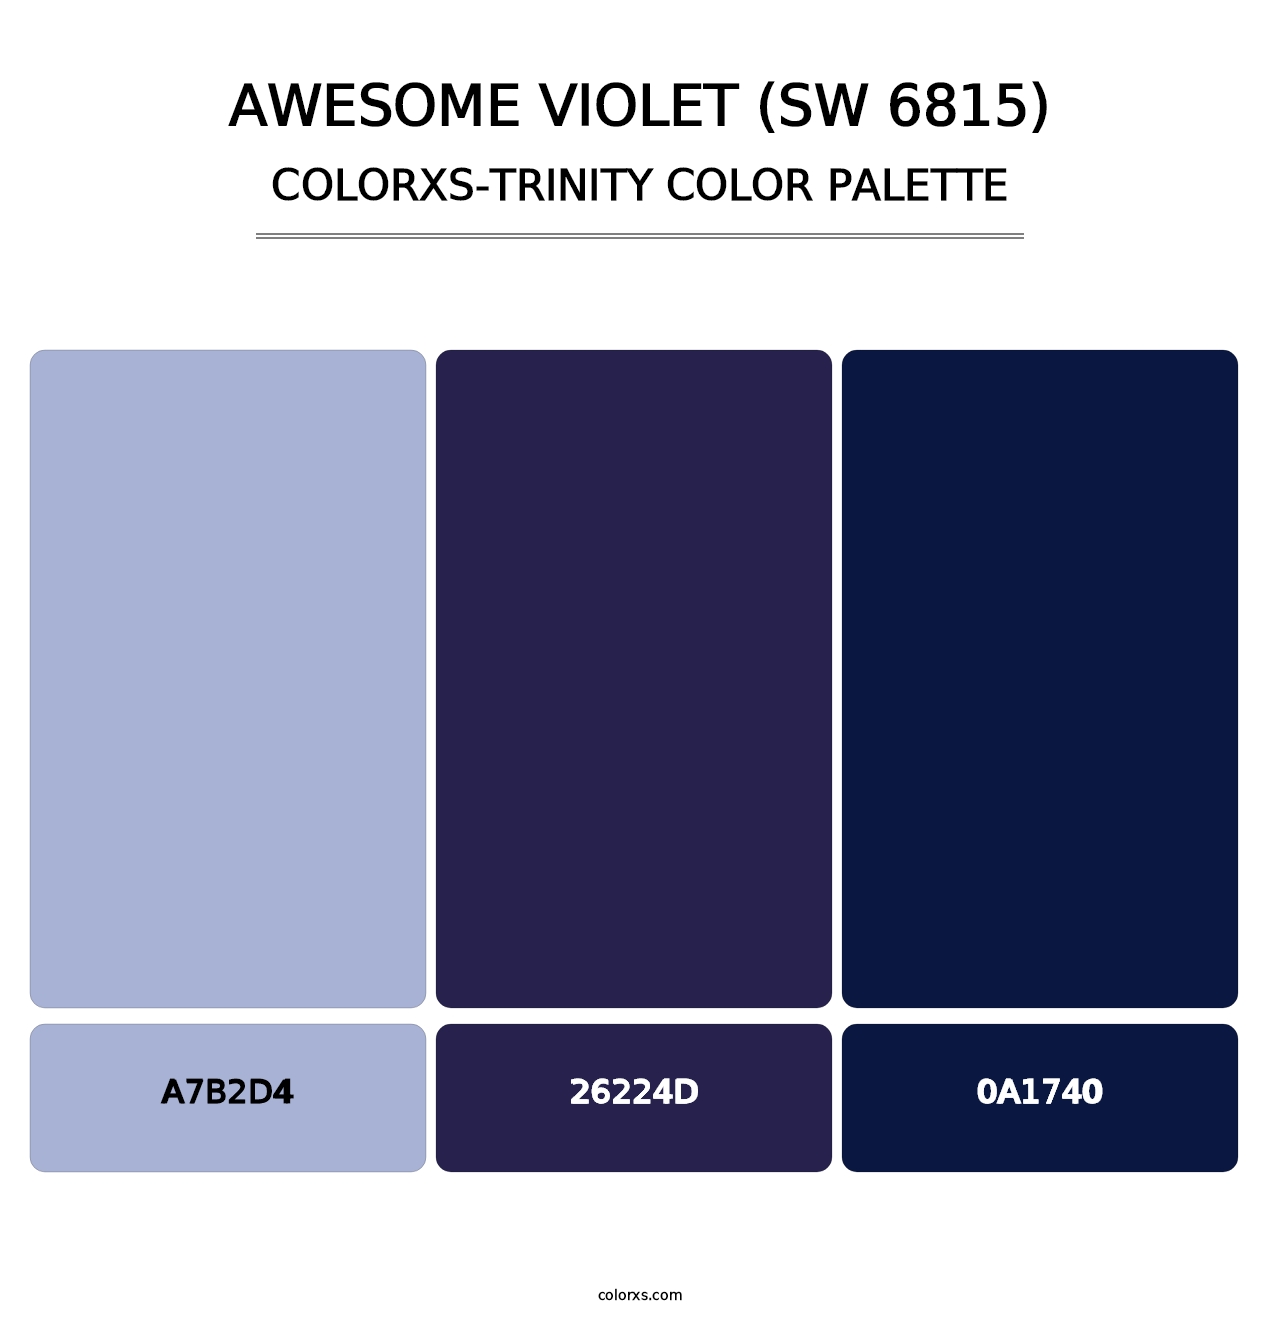 Awesome Violet (SW 6815) - Colorxs Trinity Palette